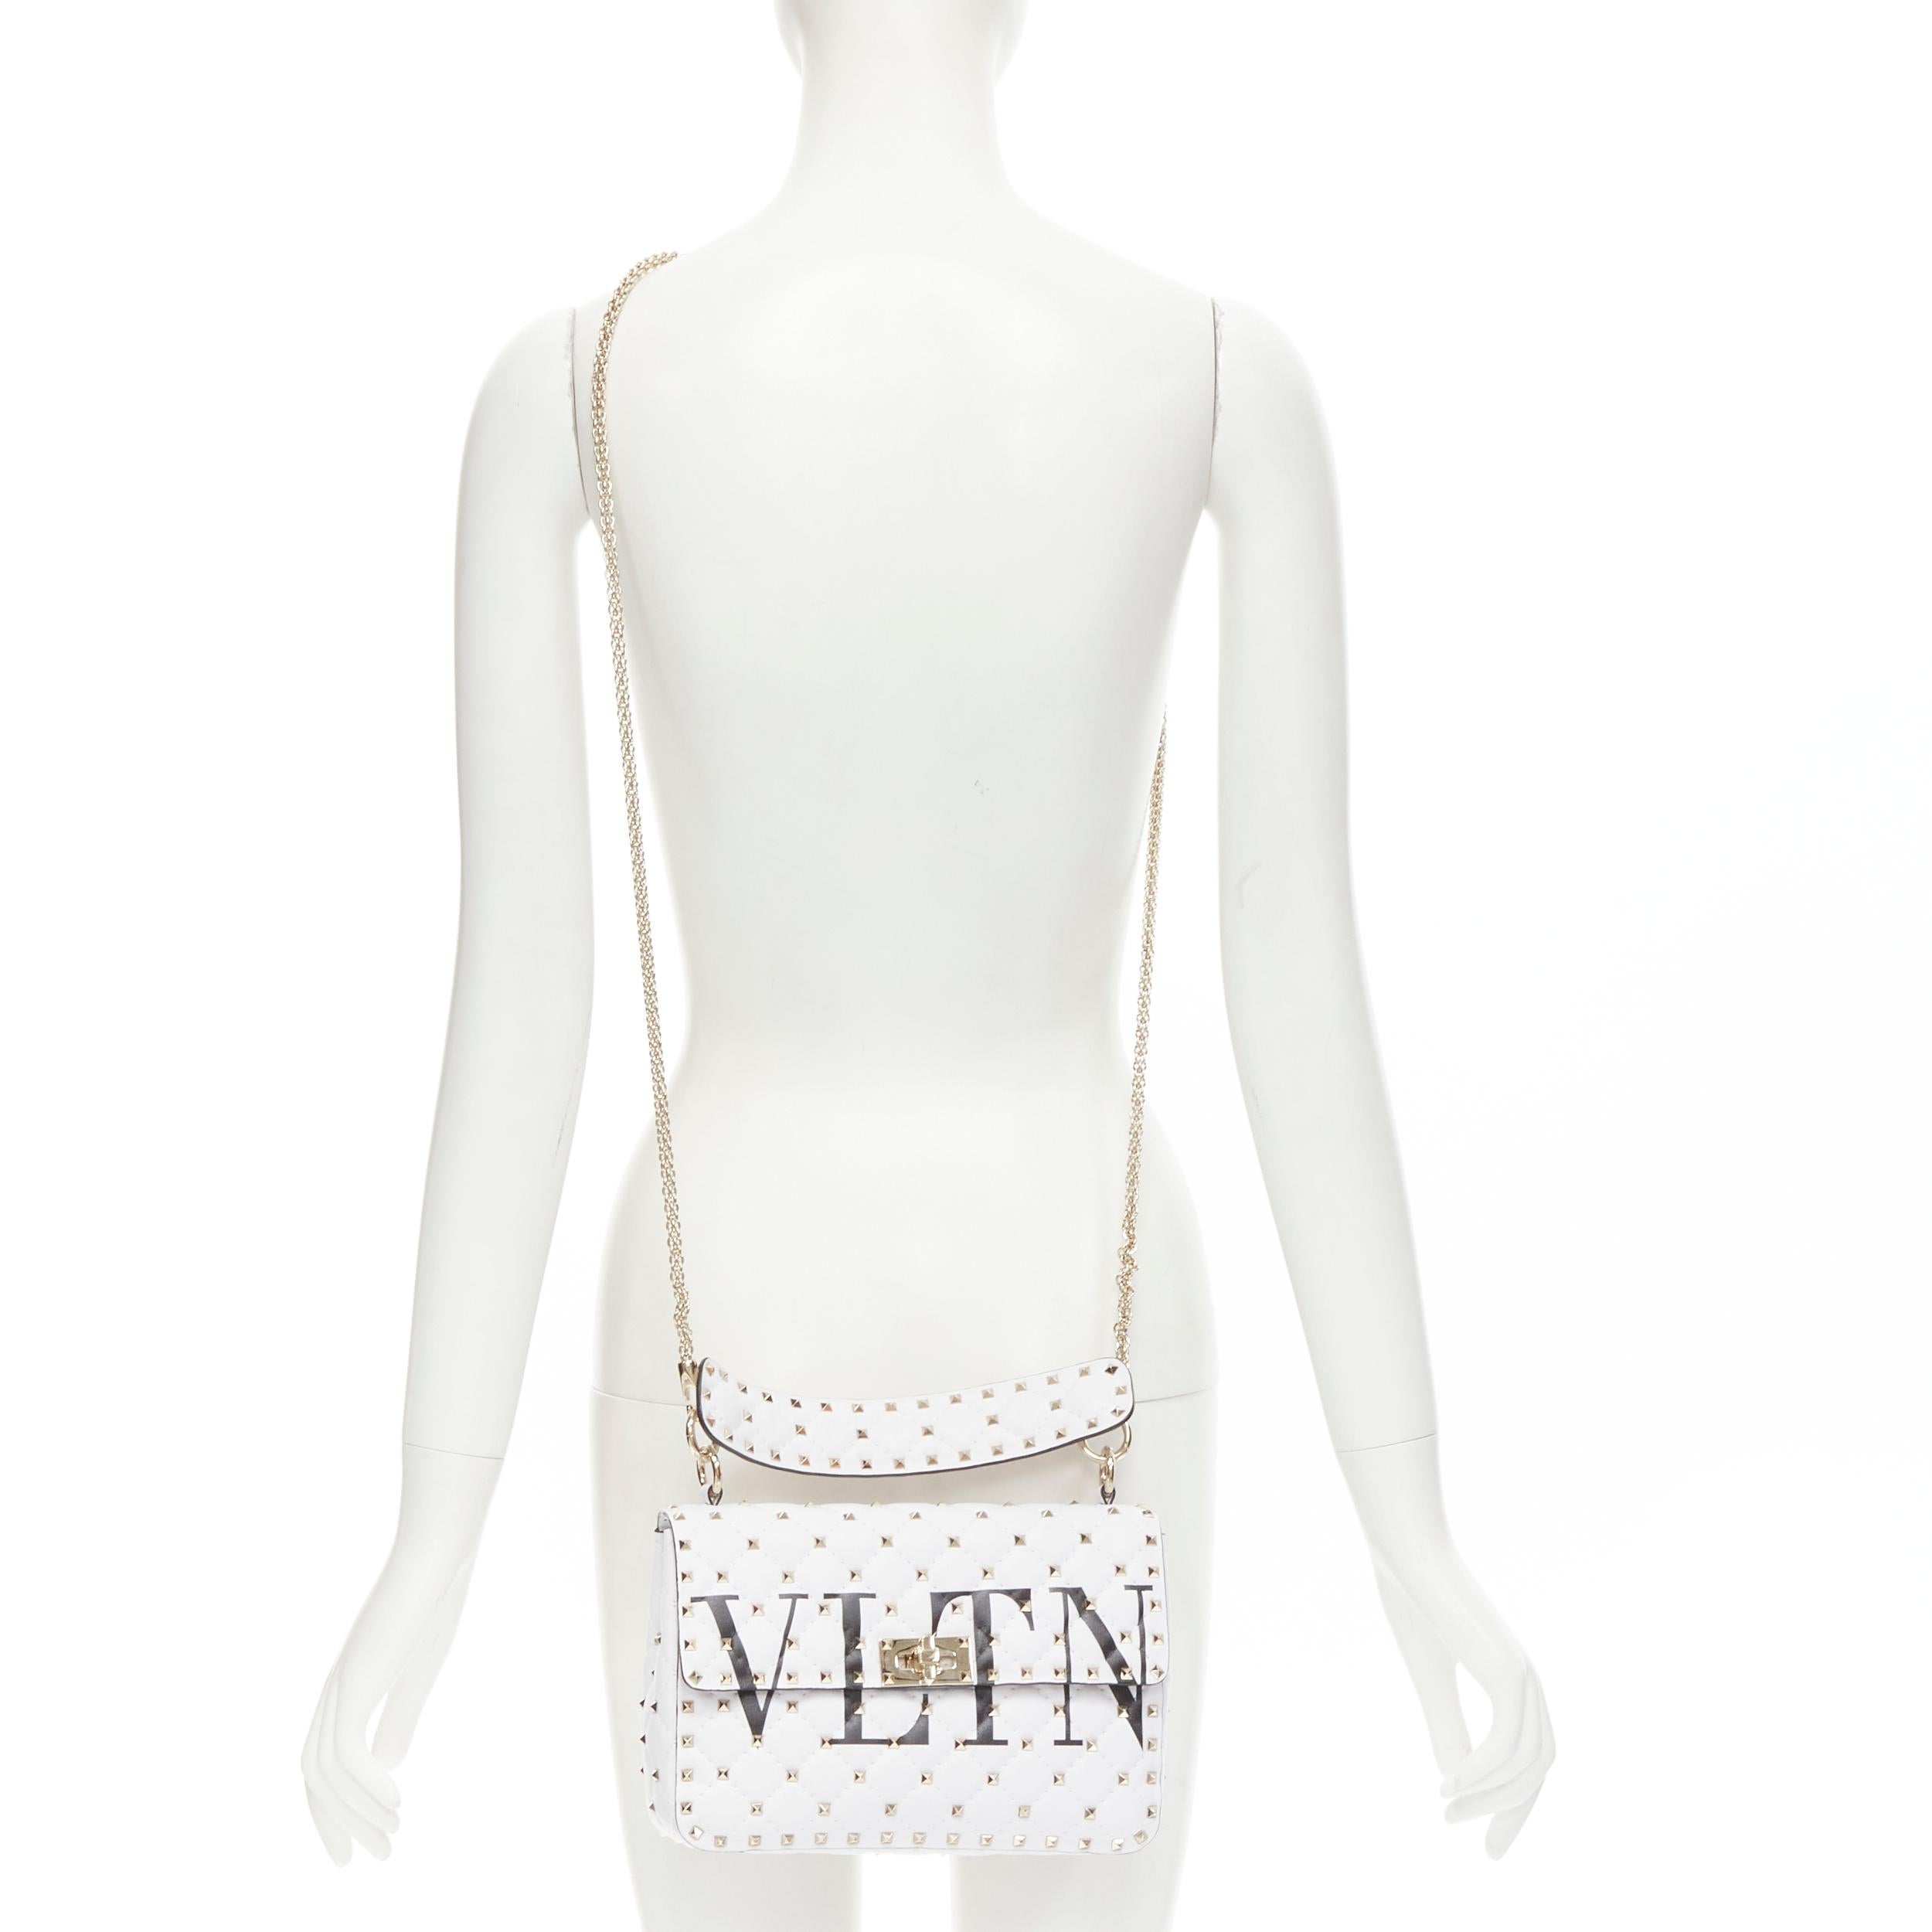 VALENTINO VLTN Rockstud Spike white gold studded turnlock crossbody flap bag Reference: KEDG/A00118 Brand: Valentino Model: VLTN Medium Rocksud Spike Material: Leather Color: White Pattern: Solid Closure: Turnlock Extra Detail: White leather with